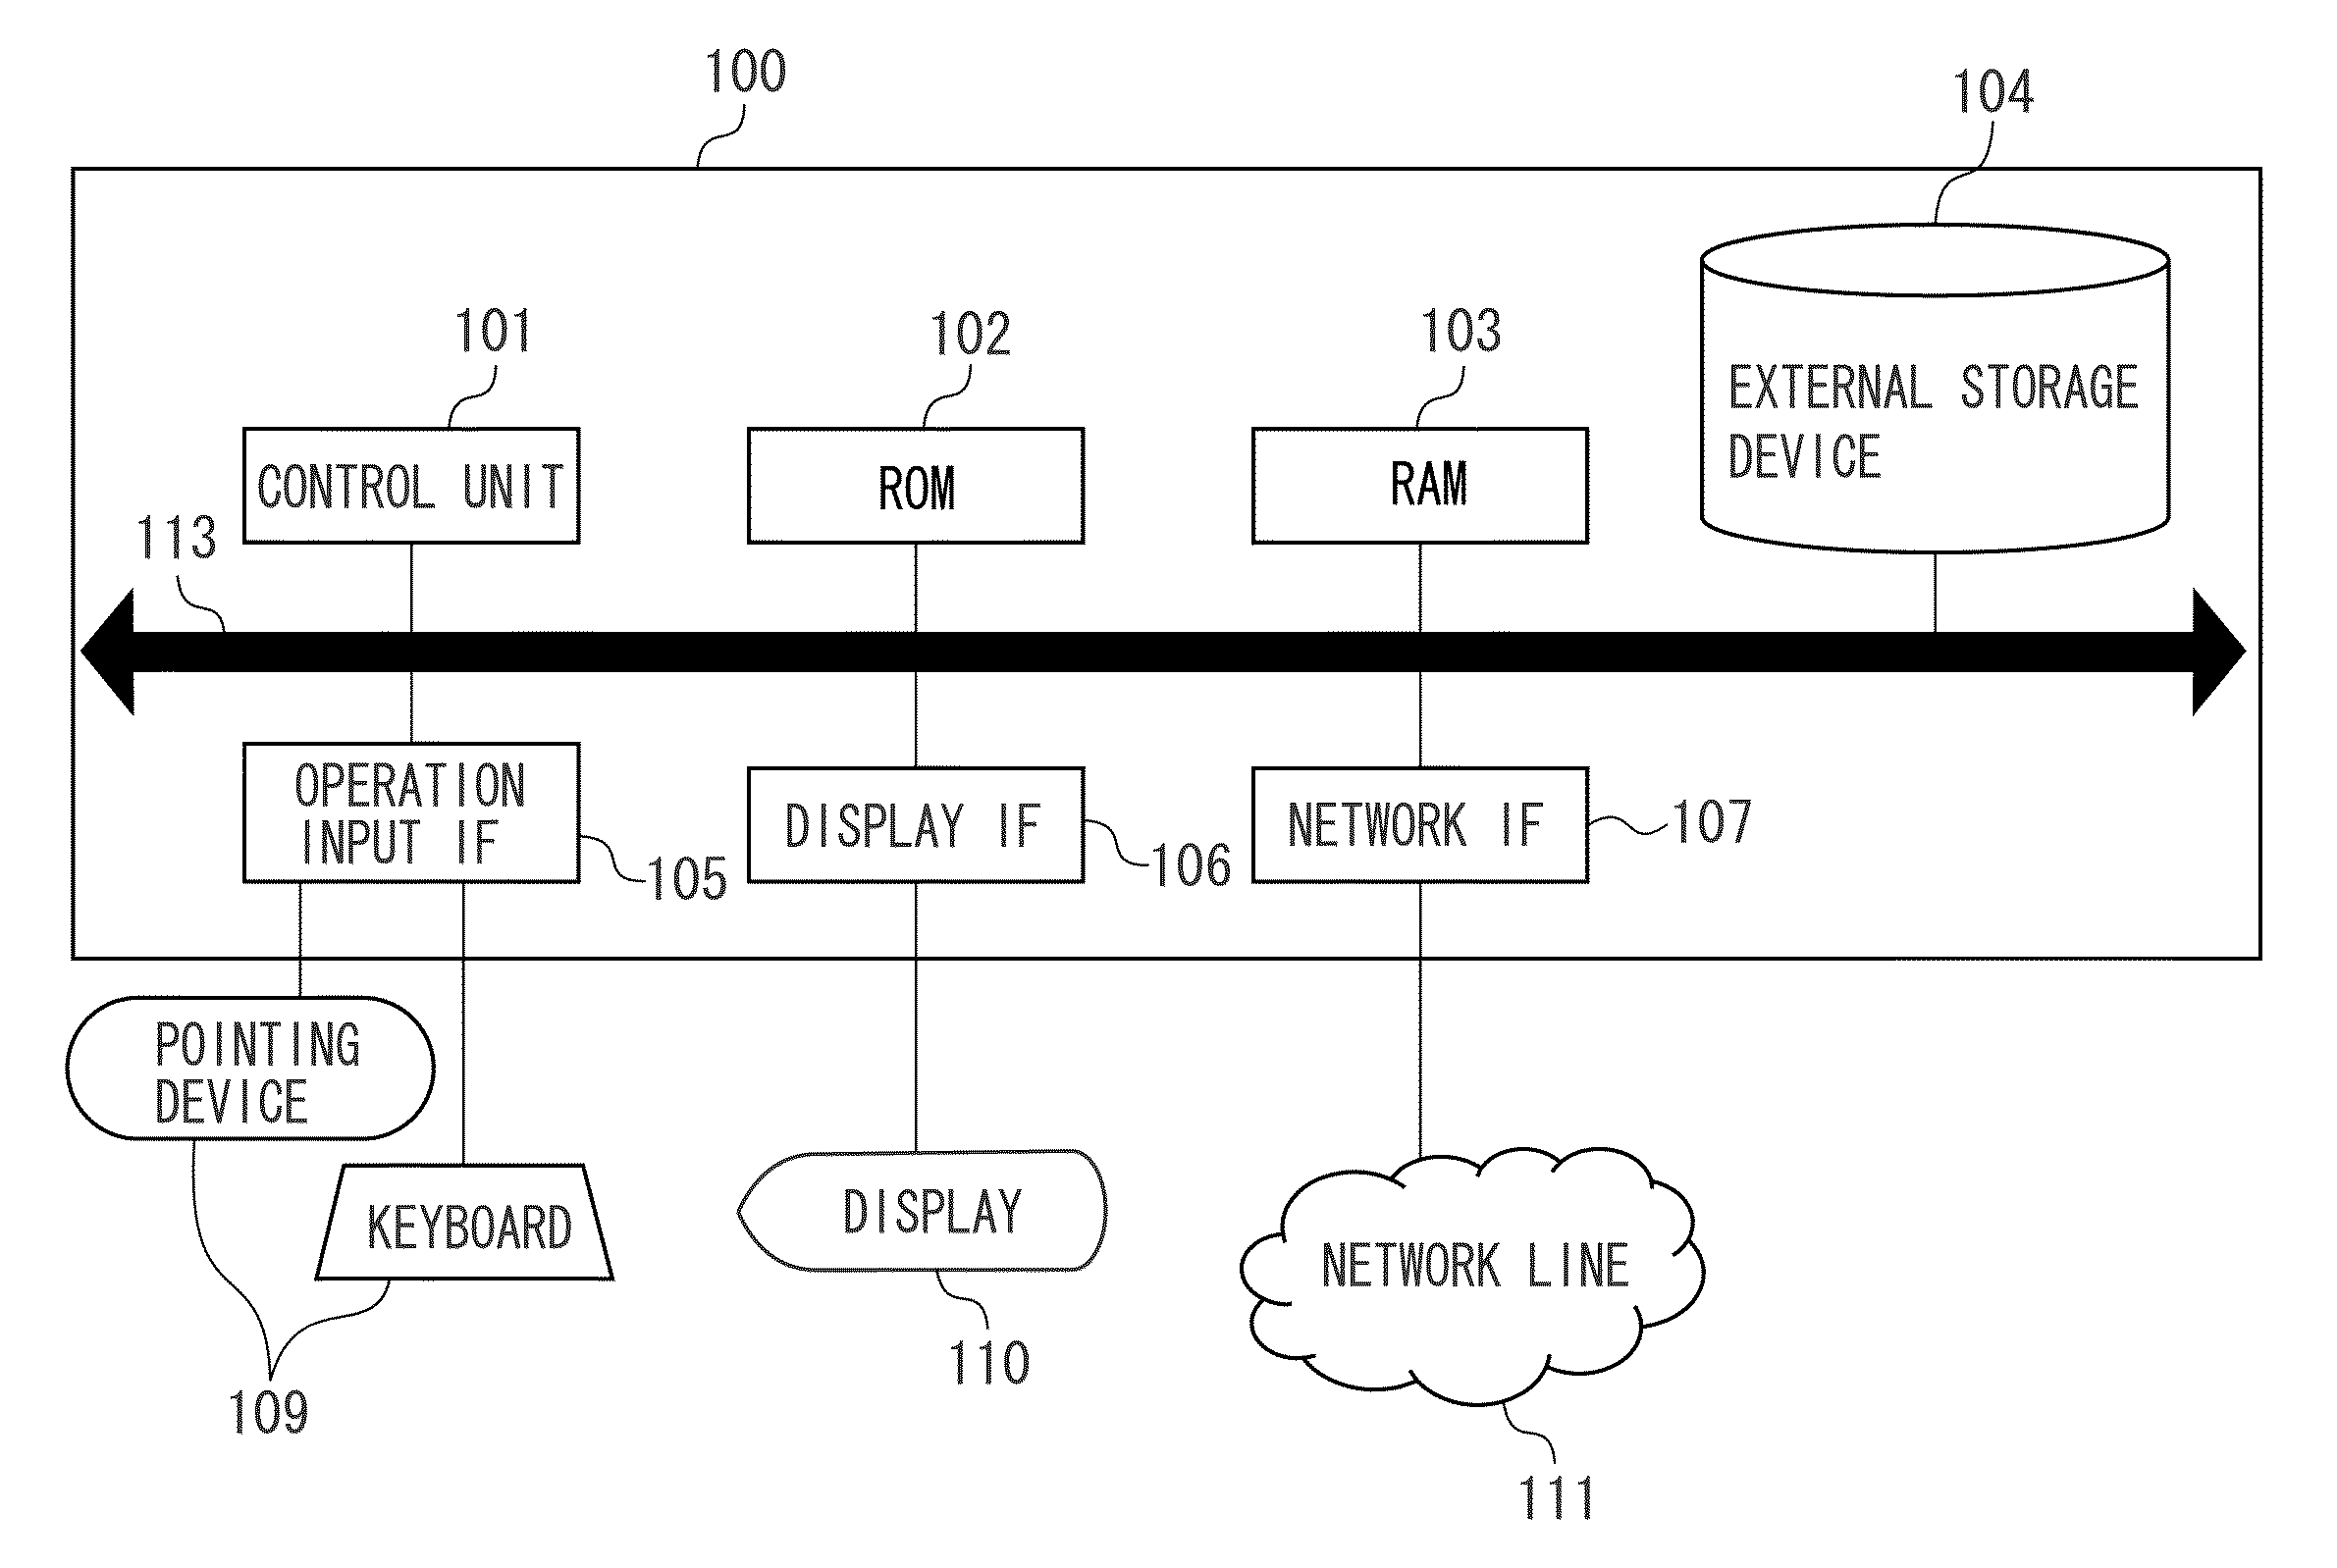 Image editing apparatus and method for controlling the same, and storage medium storing program